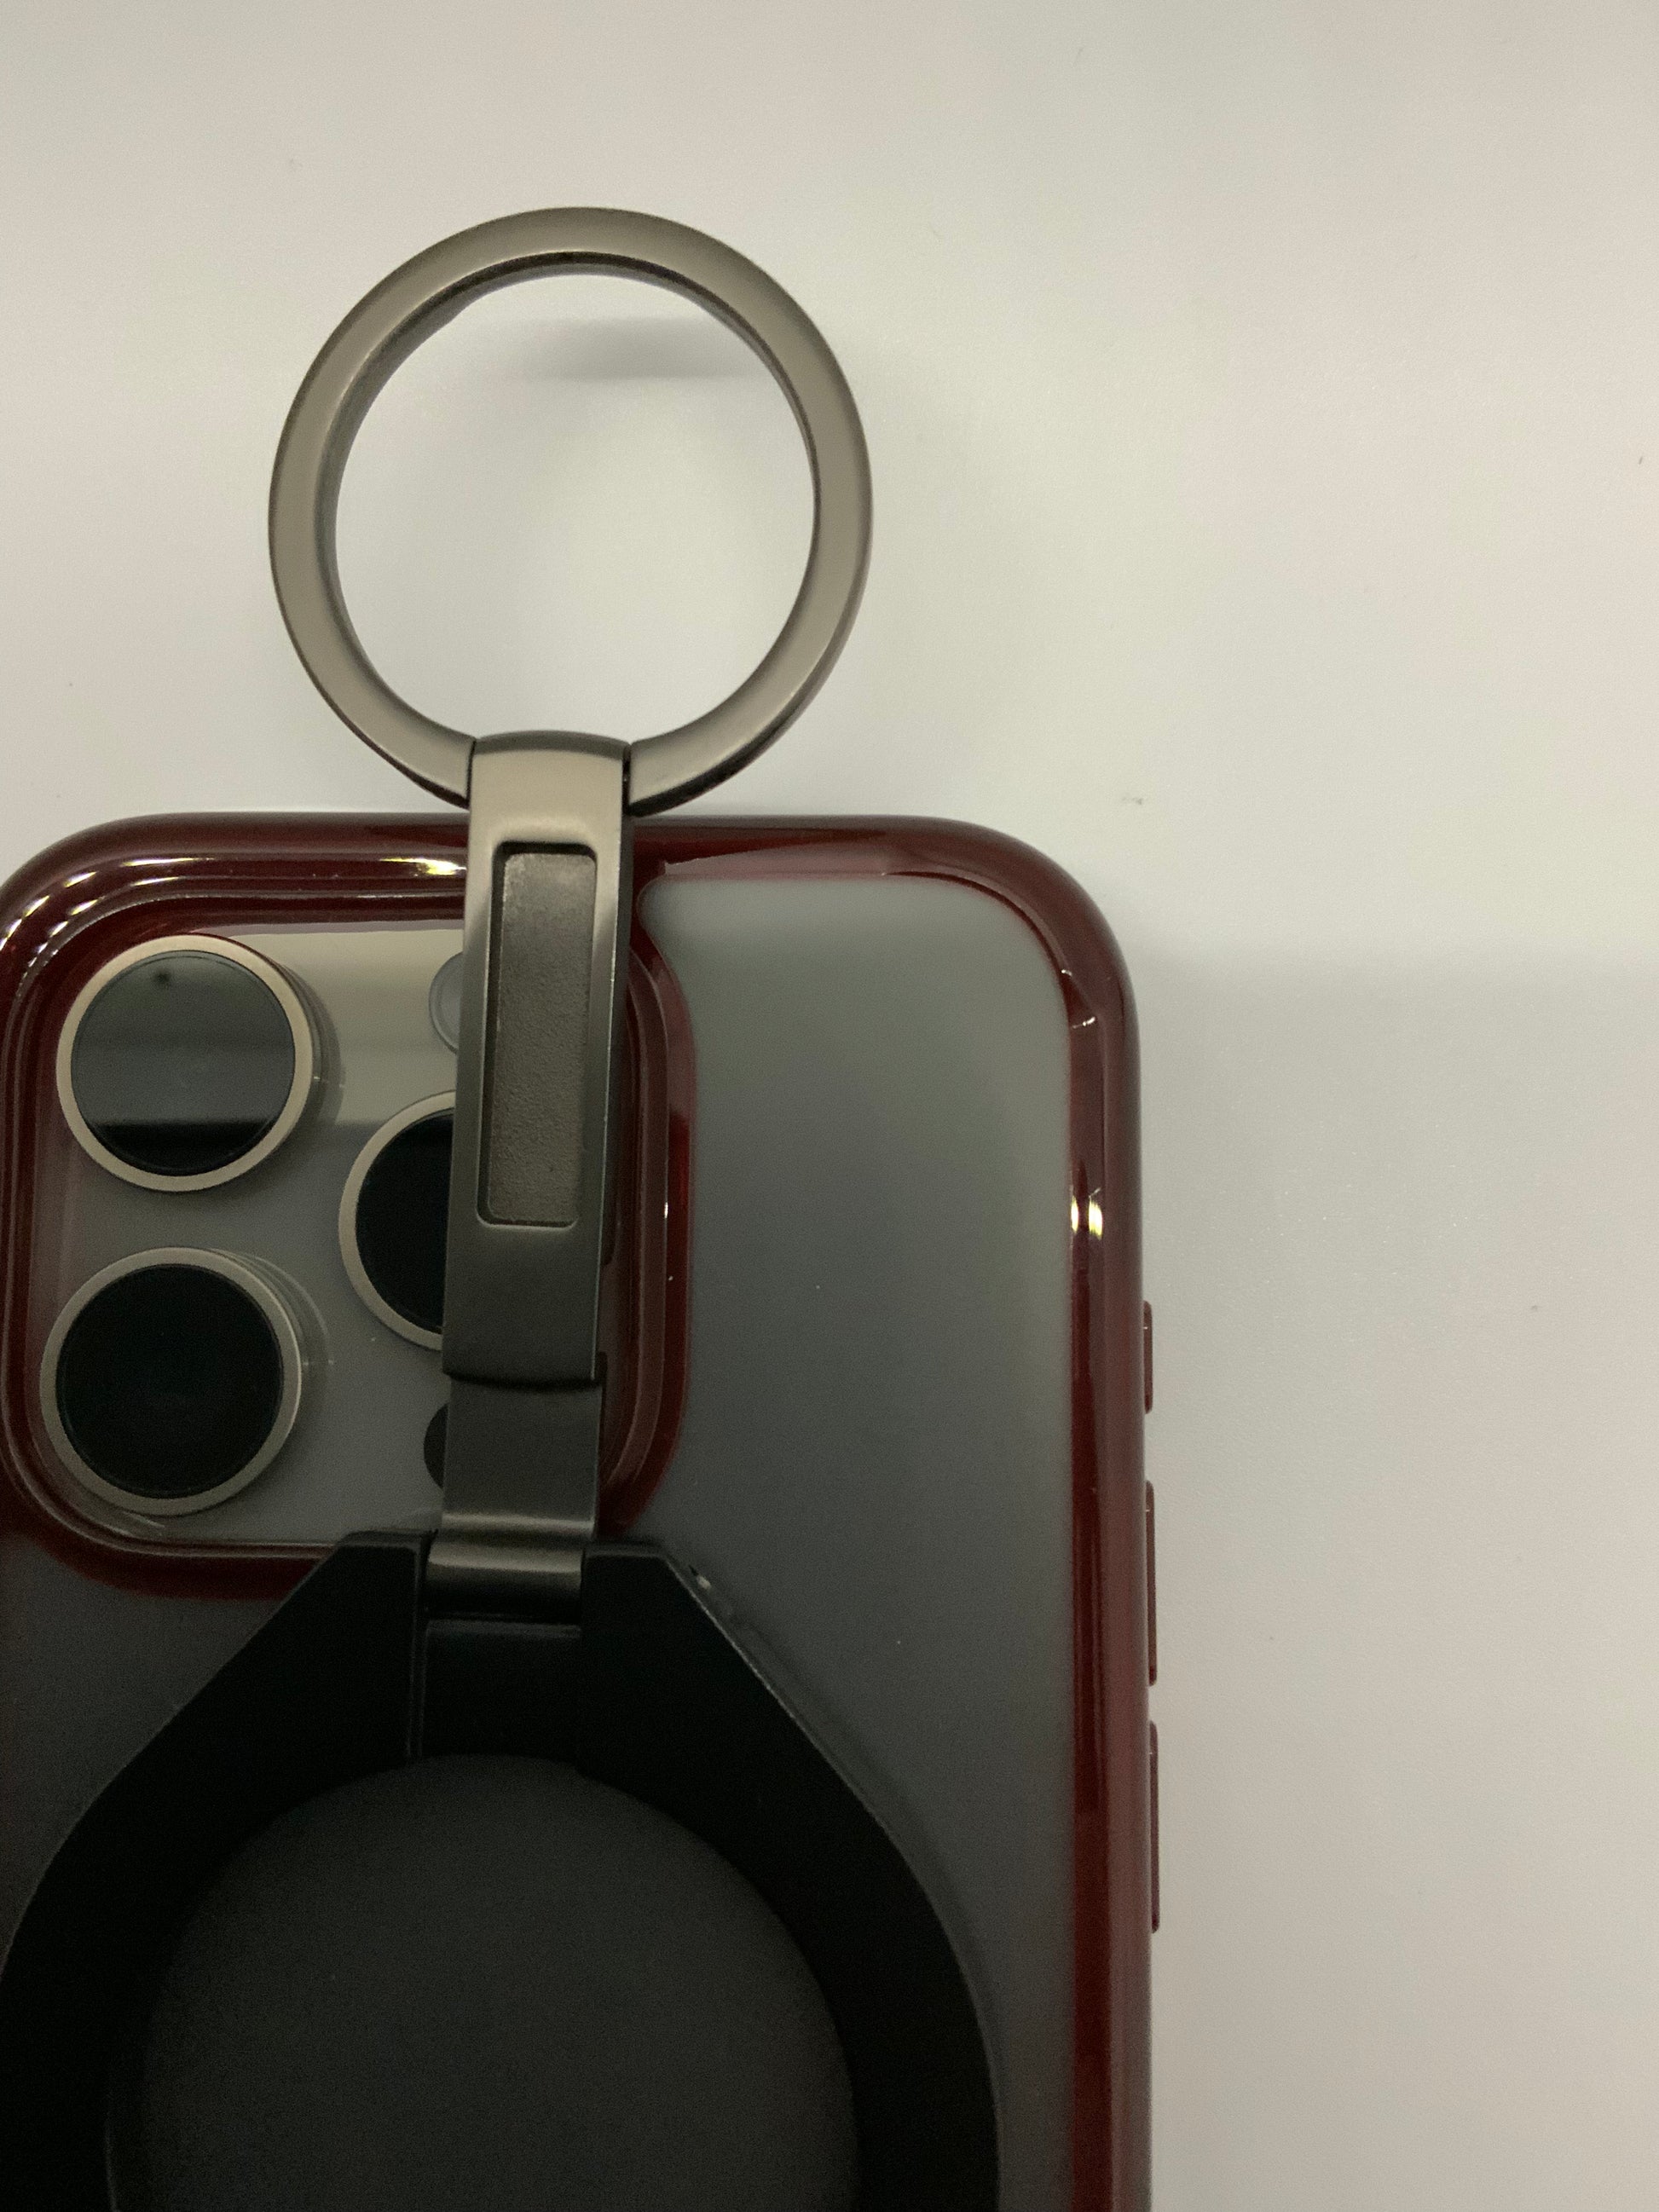 Be My AI: The picture shows a close-up of what appears to be a phone case with an attached ring holder. The phone case is a deep red color with a cutout for the camera and flash on the back of the phone. The ring holder is attached to the back of the case and is made of metal. It has a circular ring at the top, which is attached to a base that is adhered to the phone case. The ring is in an upright position and can likely be used to hold the phone securely with a finger through the ring or as a stand to pro